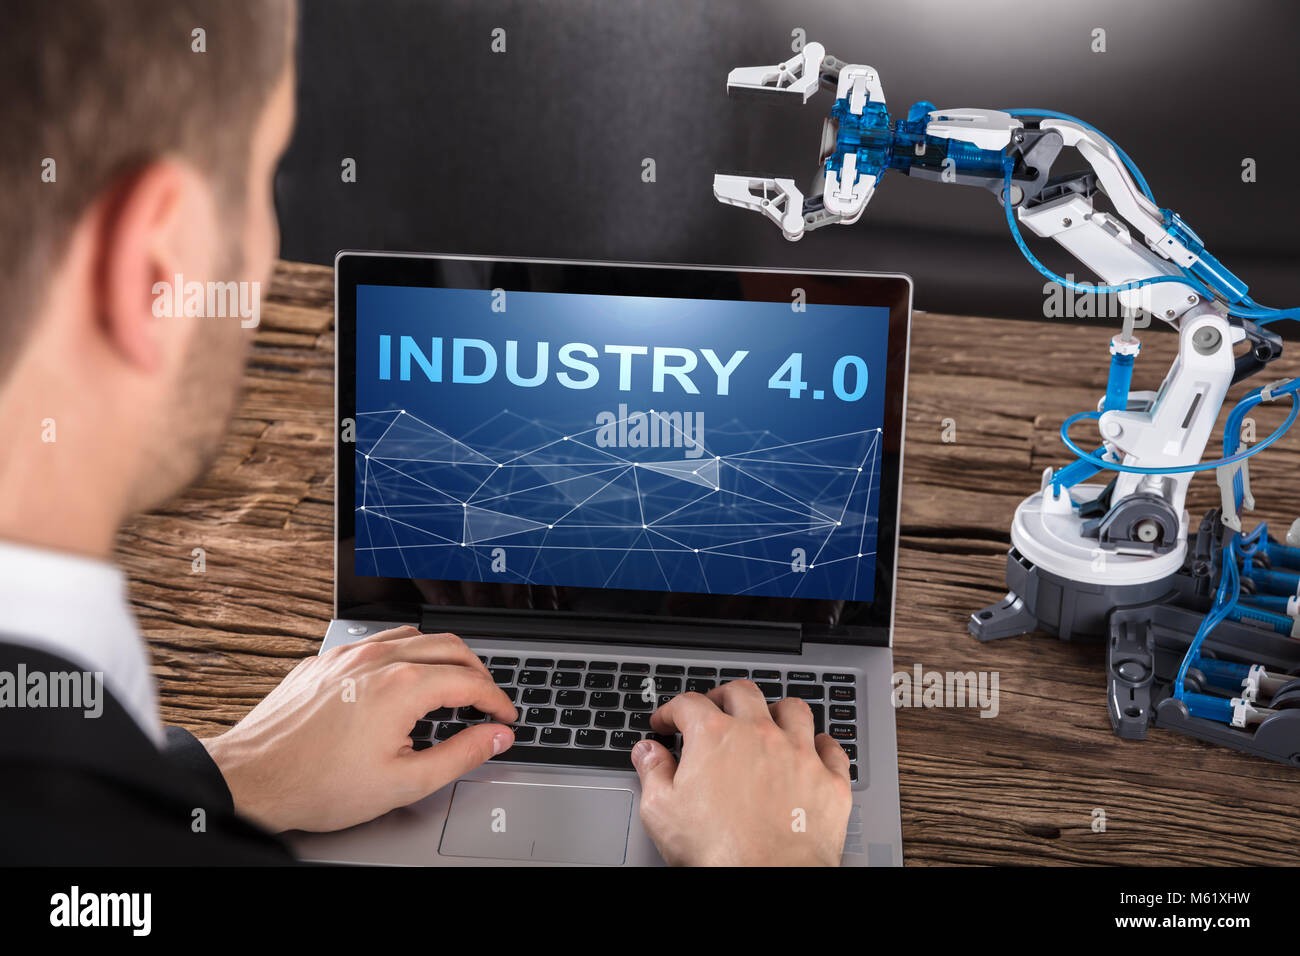 Close-up Of Businessperson Working On Design Of Industrial Robot Arm On Laptop Stock Photo